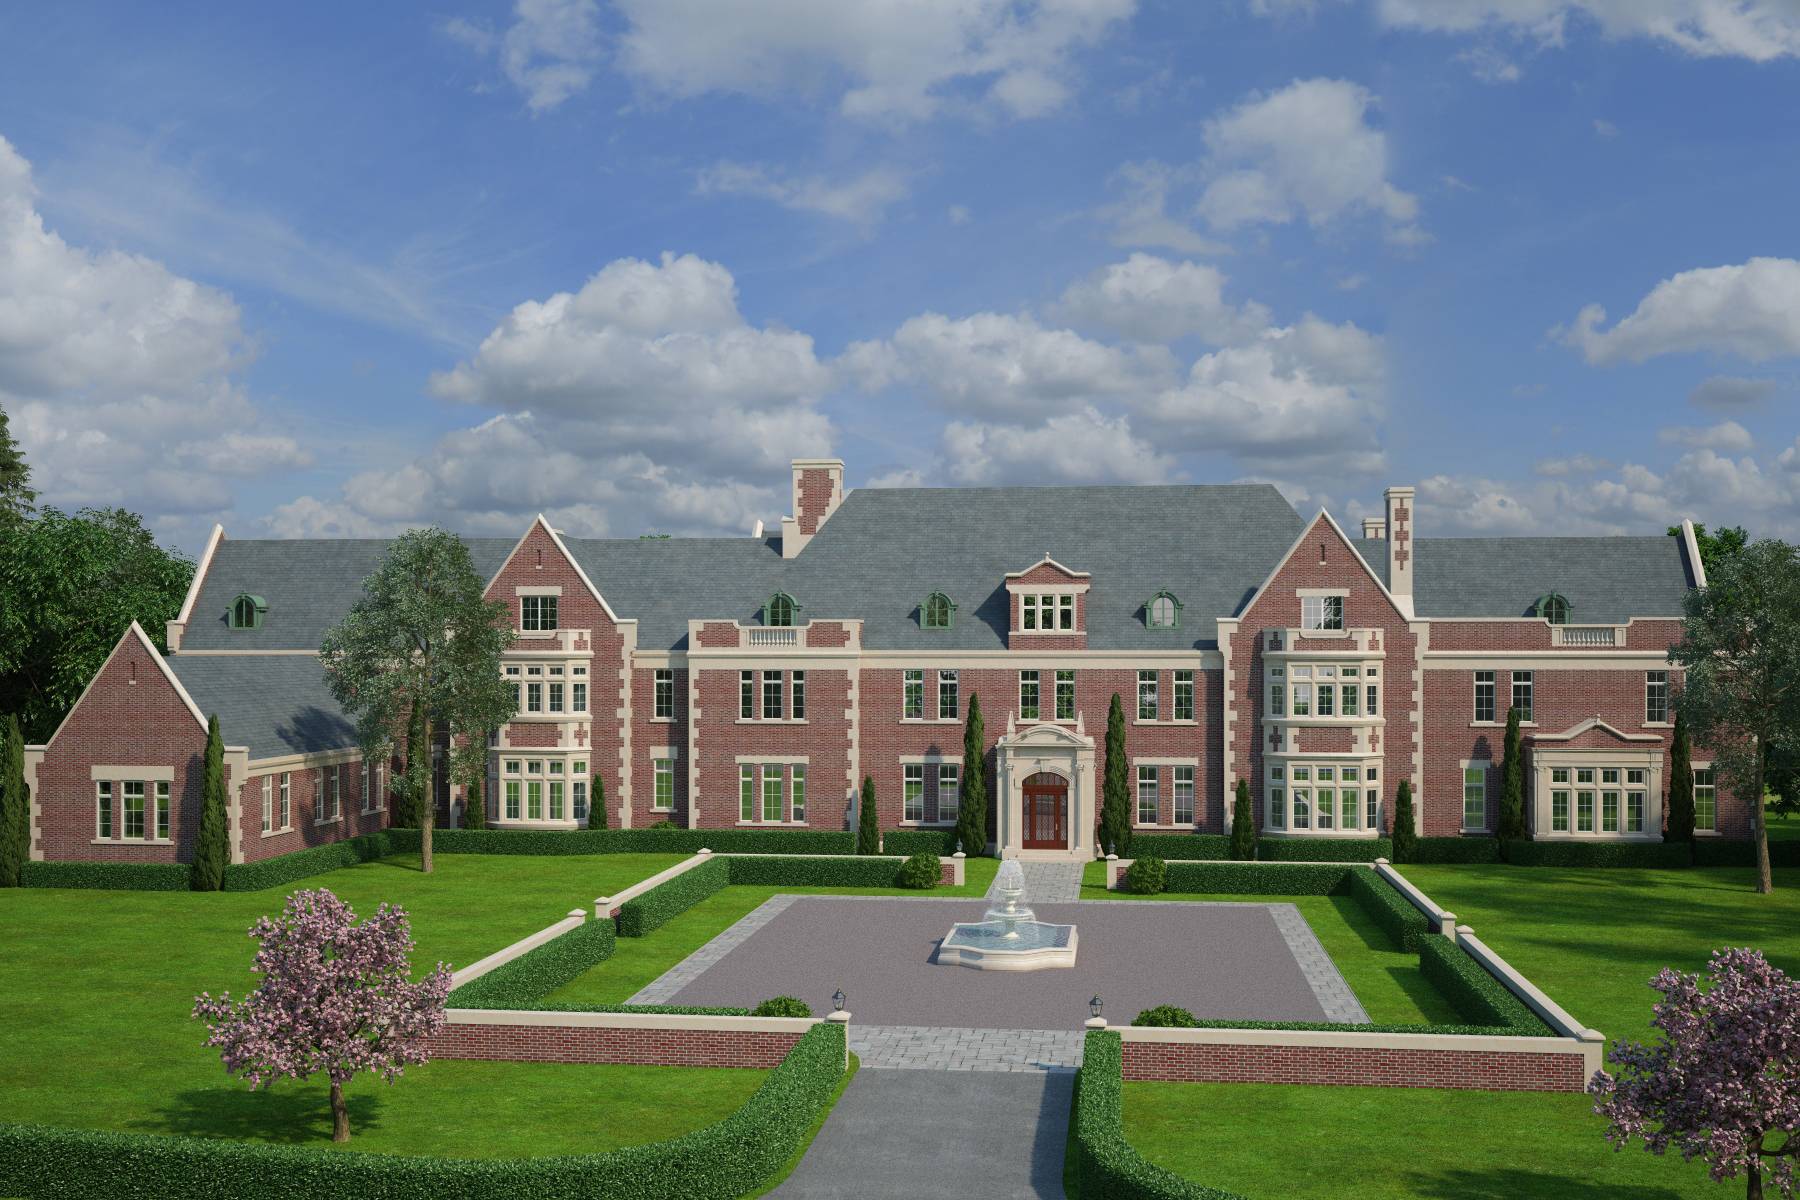 A Grand Estate: The Crown Jewel of Westchester & The Epitome of Luxury and Privacy